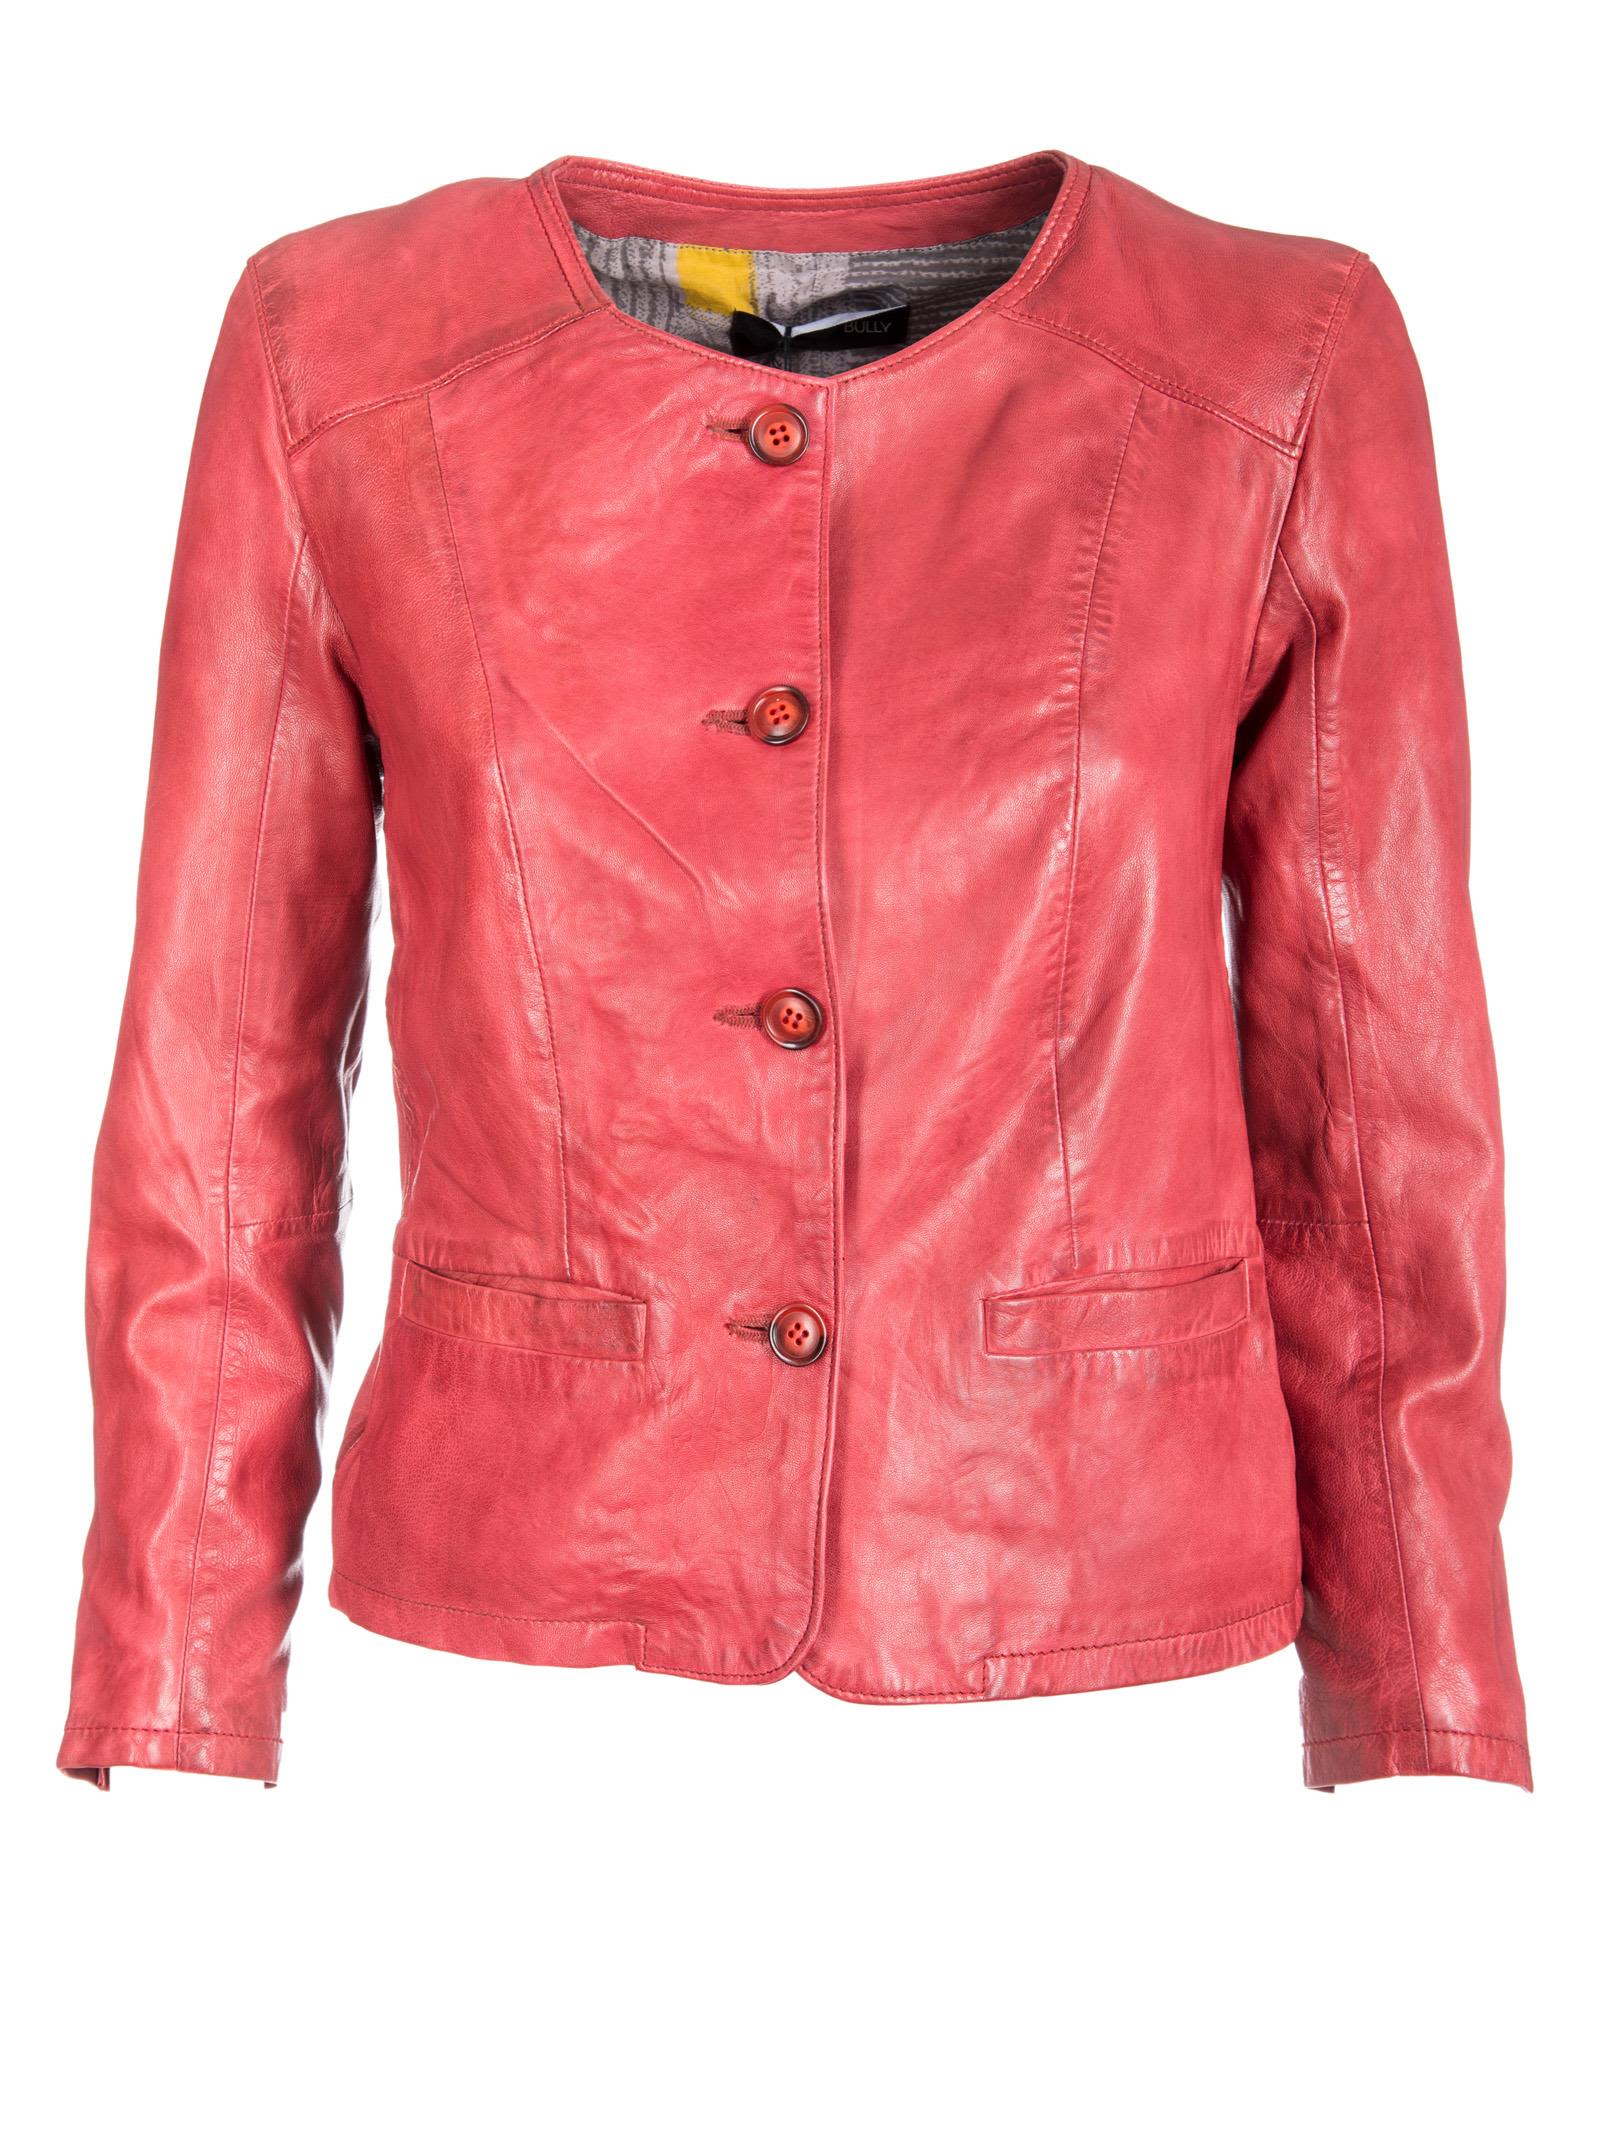 Bully - Bully Classic Leather Jacket, Women's Leather Jackets | Italist